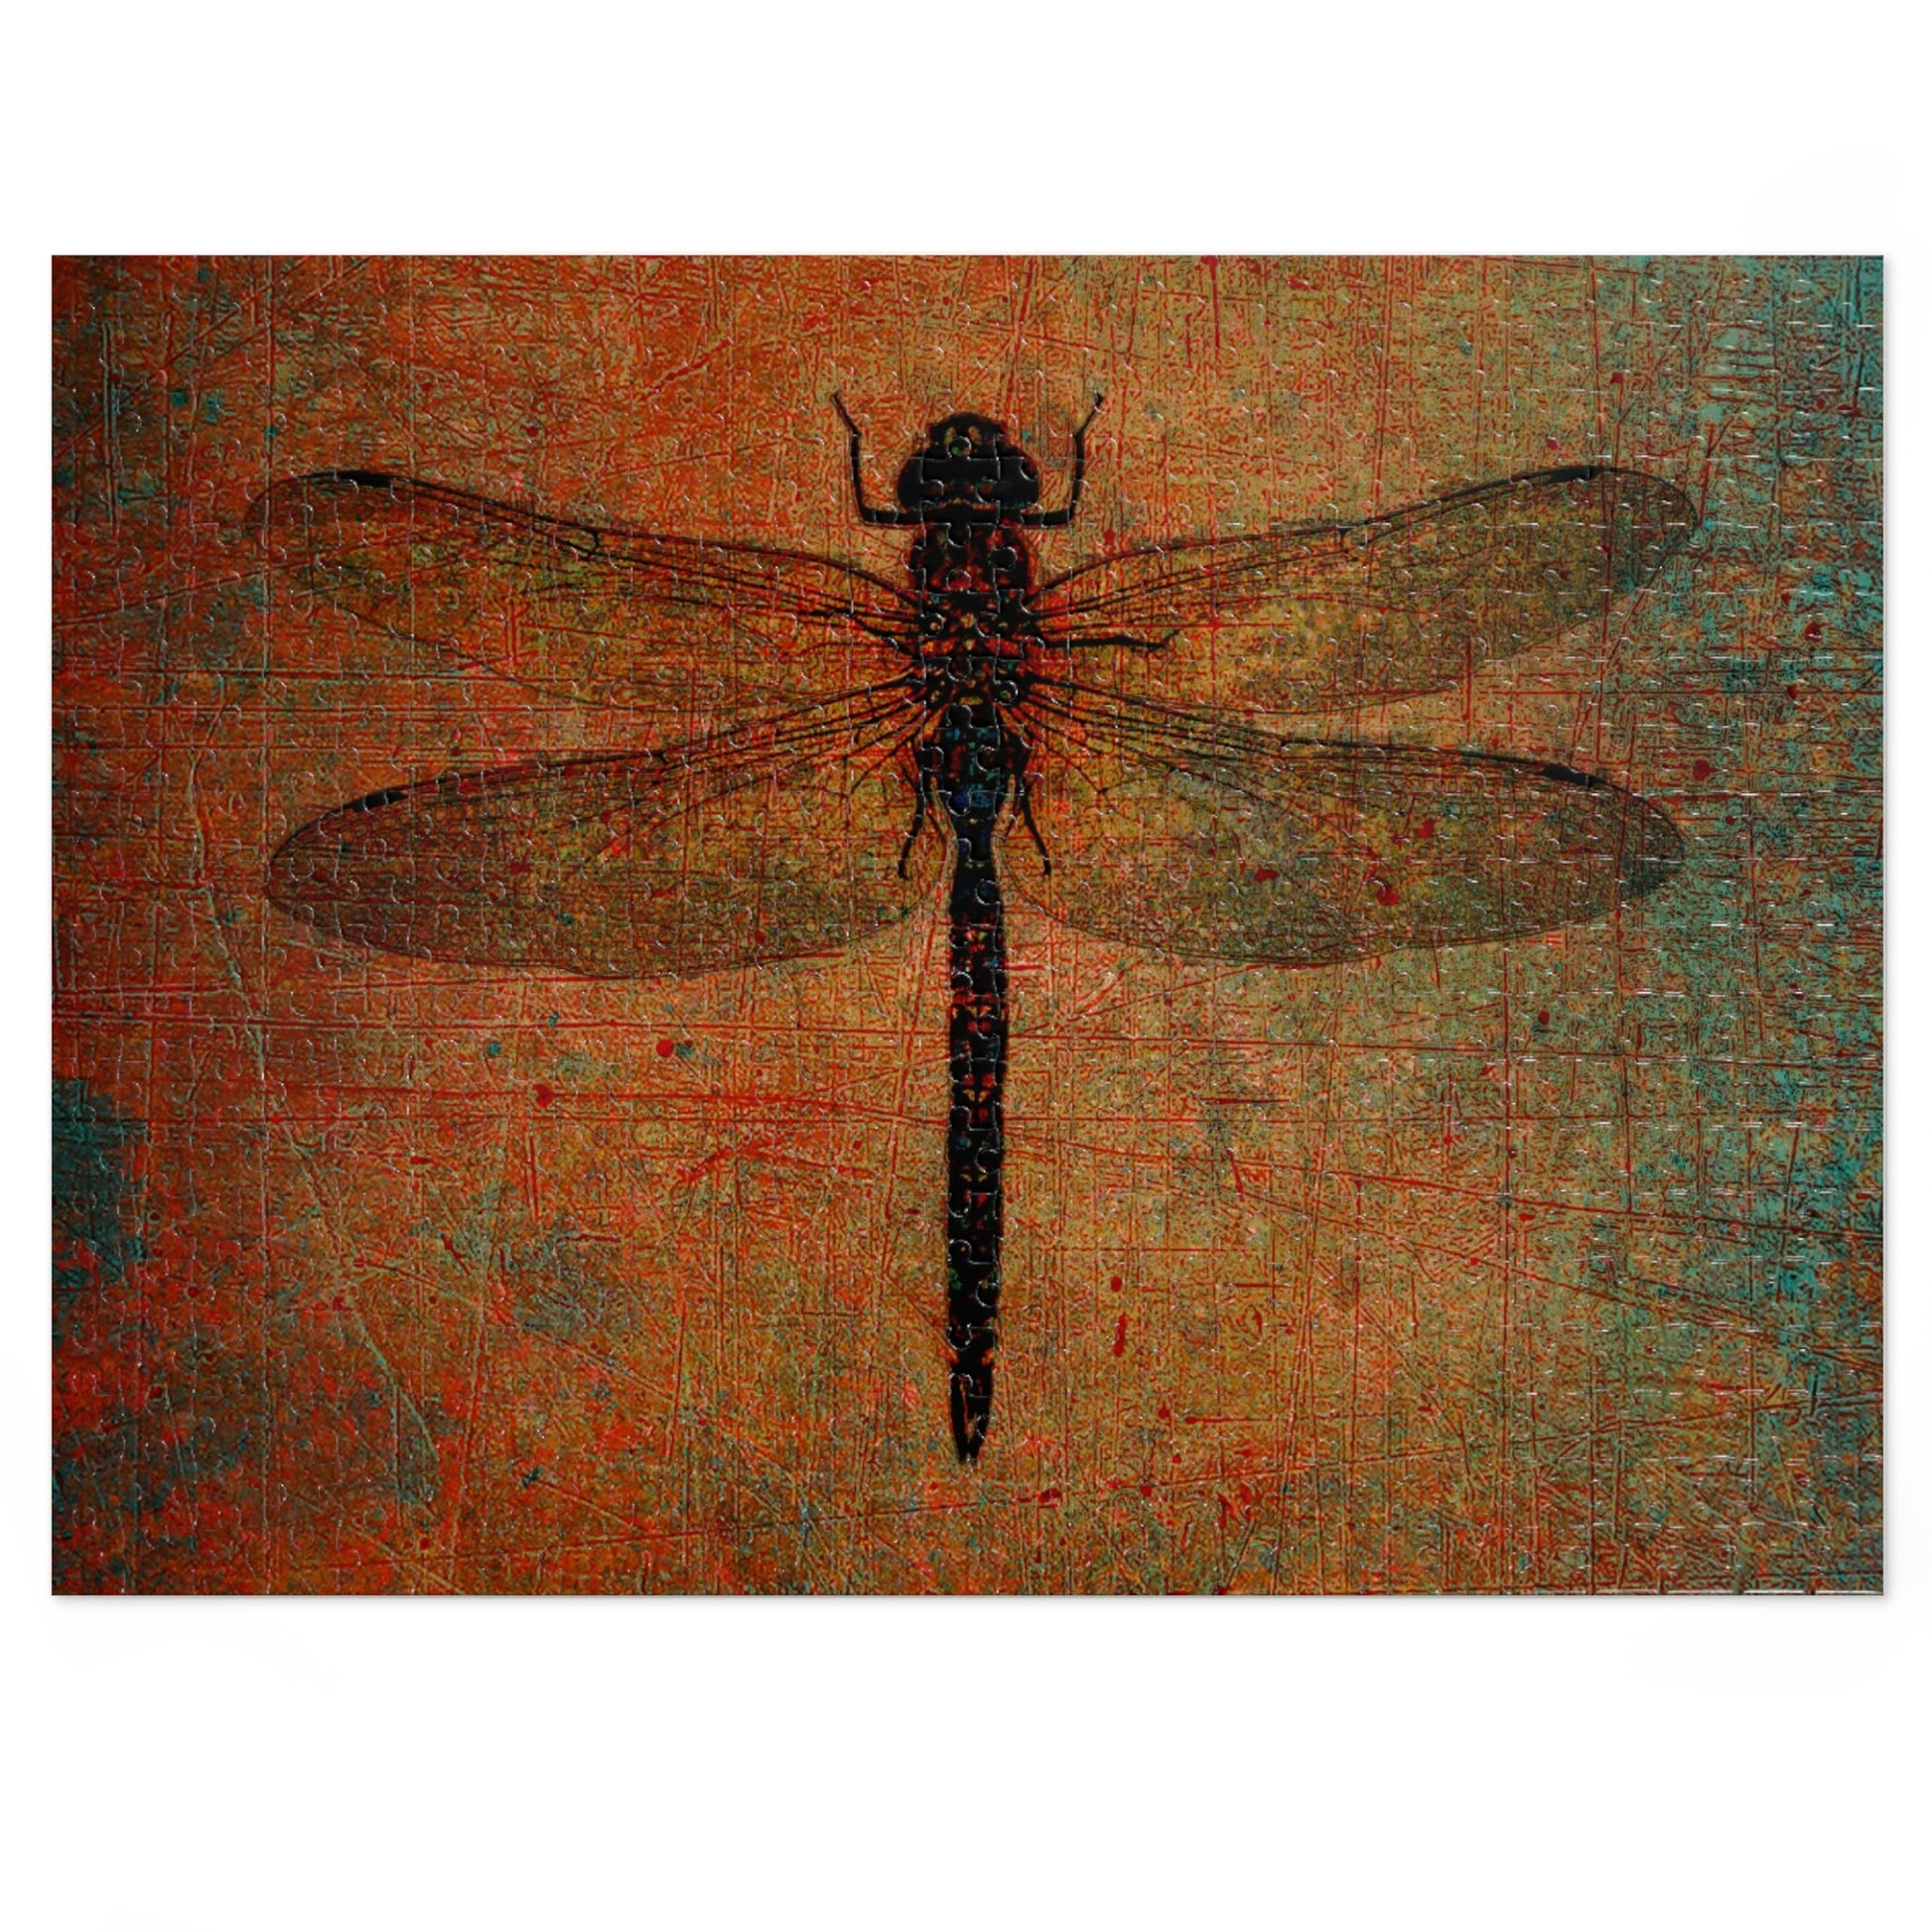 Dragonfly on Brown Stone Background Puzzle 500 pieces